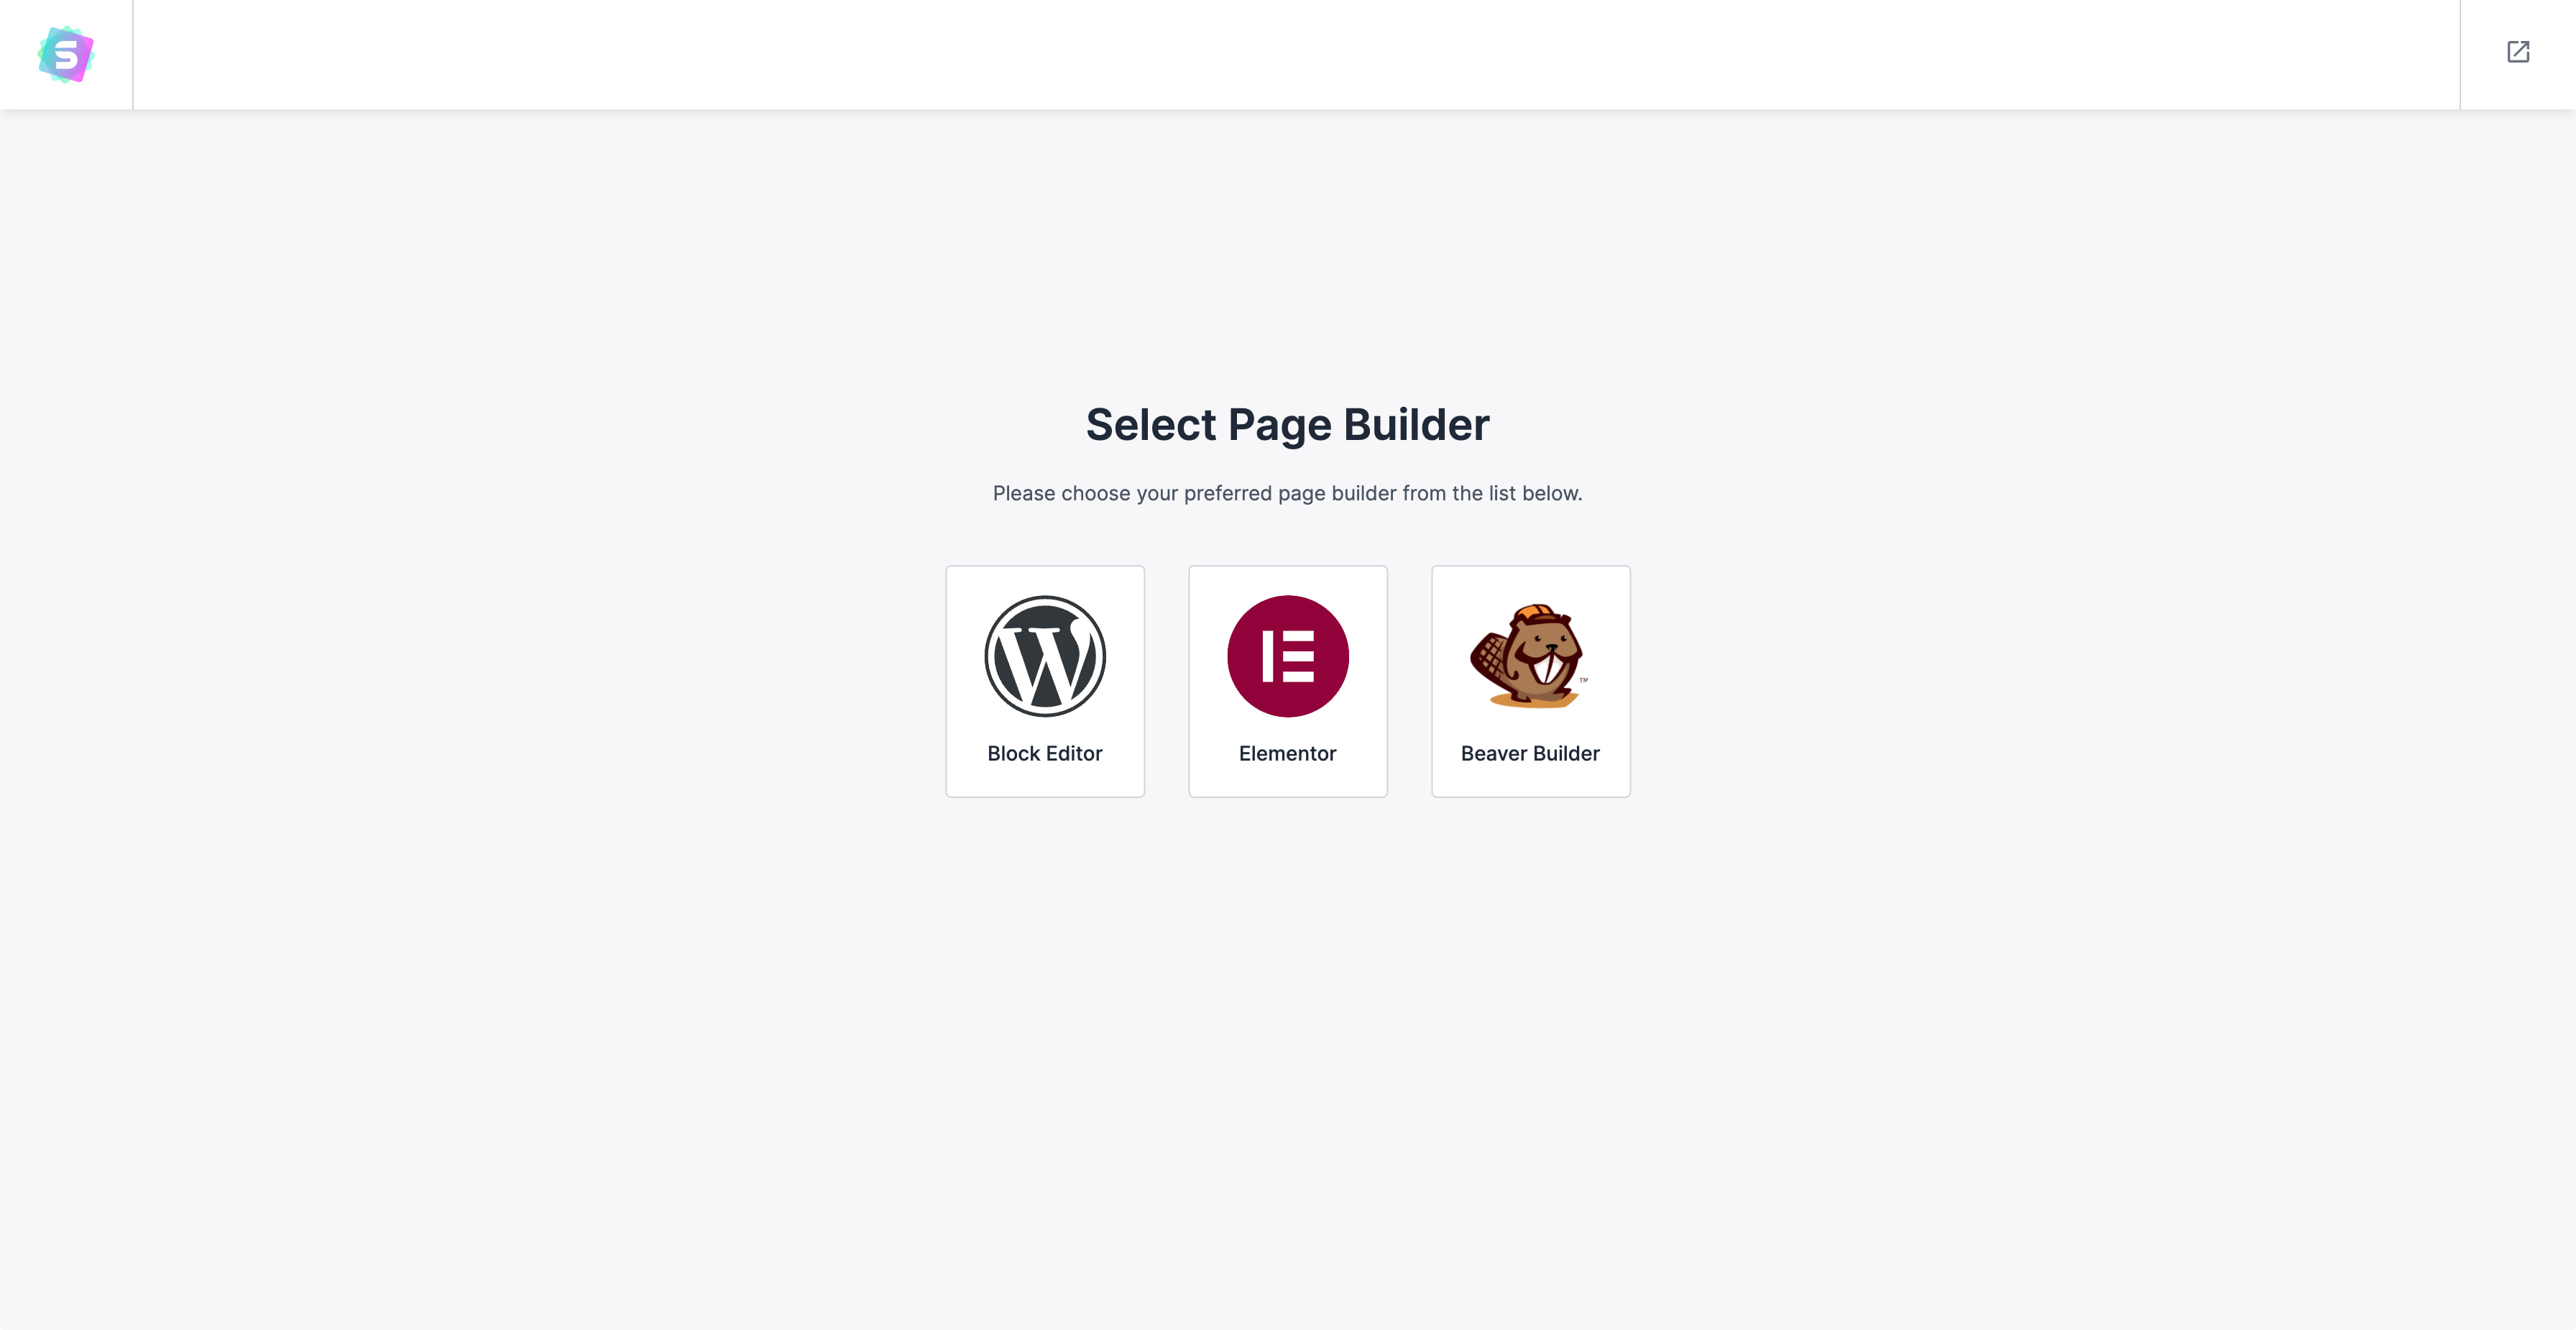 Select the page builder of your choice.